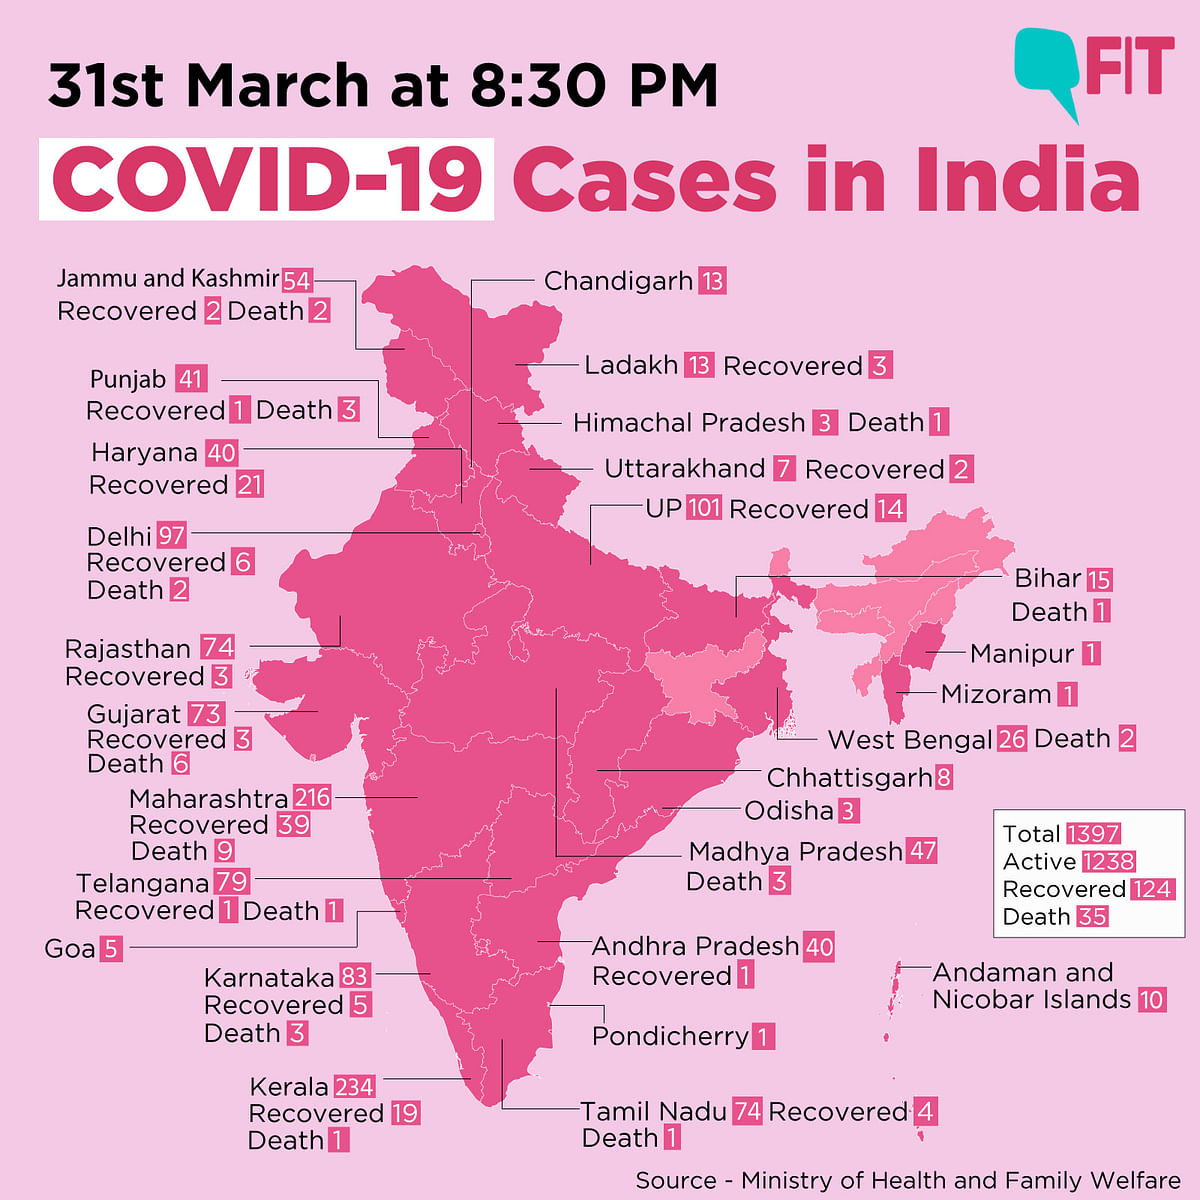 COVID-19 India Update: Death Toll Rises to 35, Total Cases 1,397